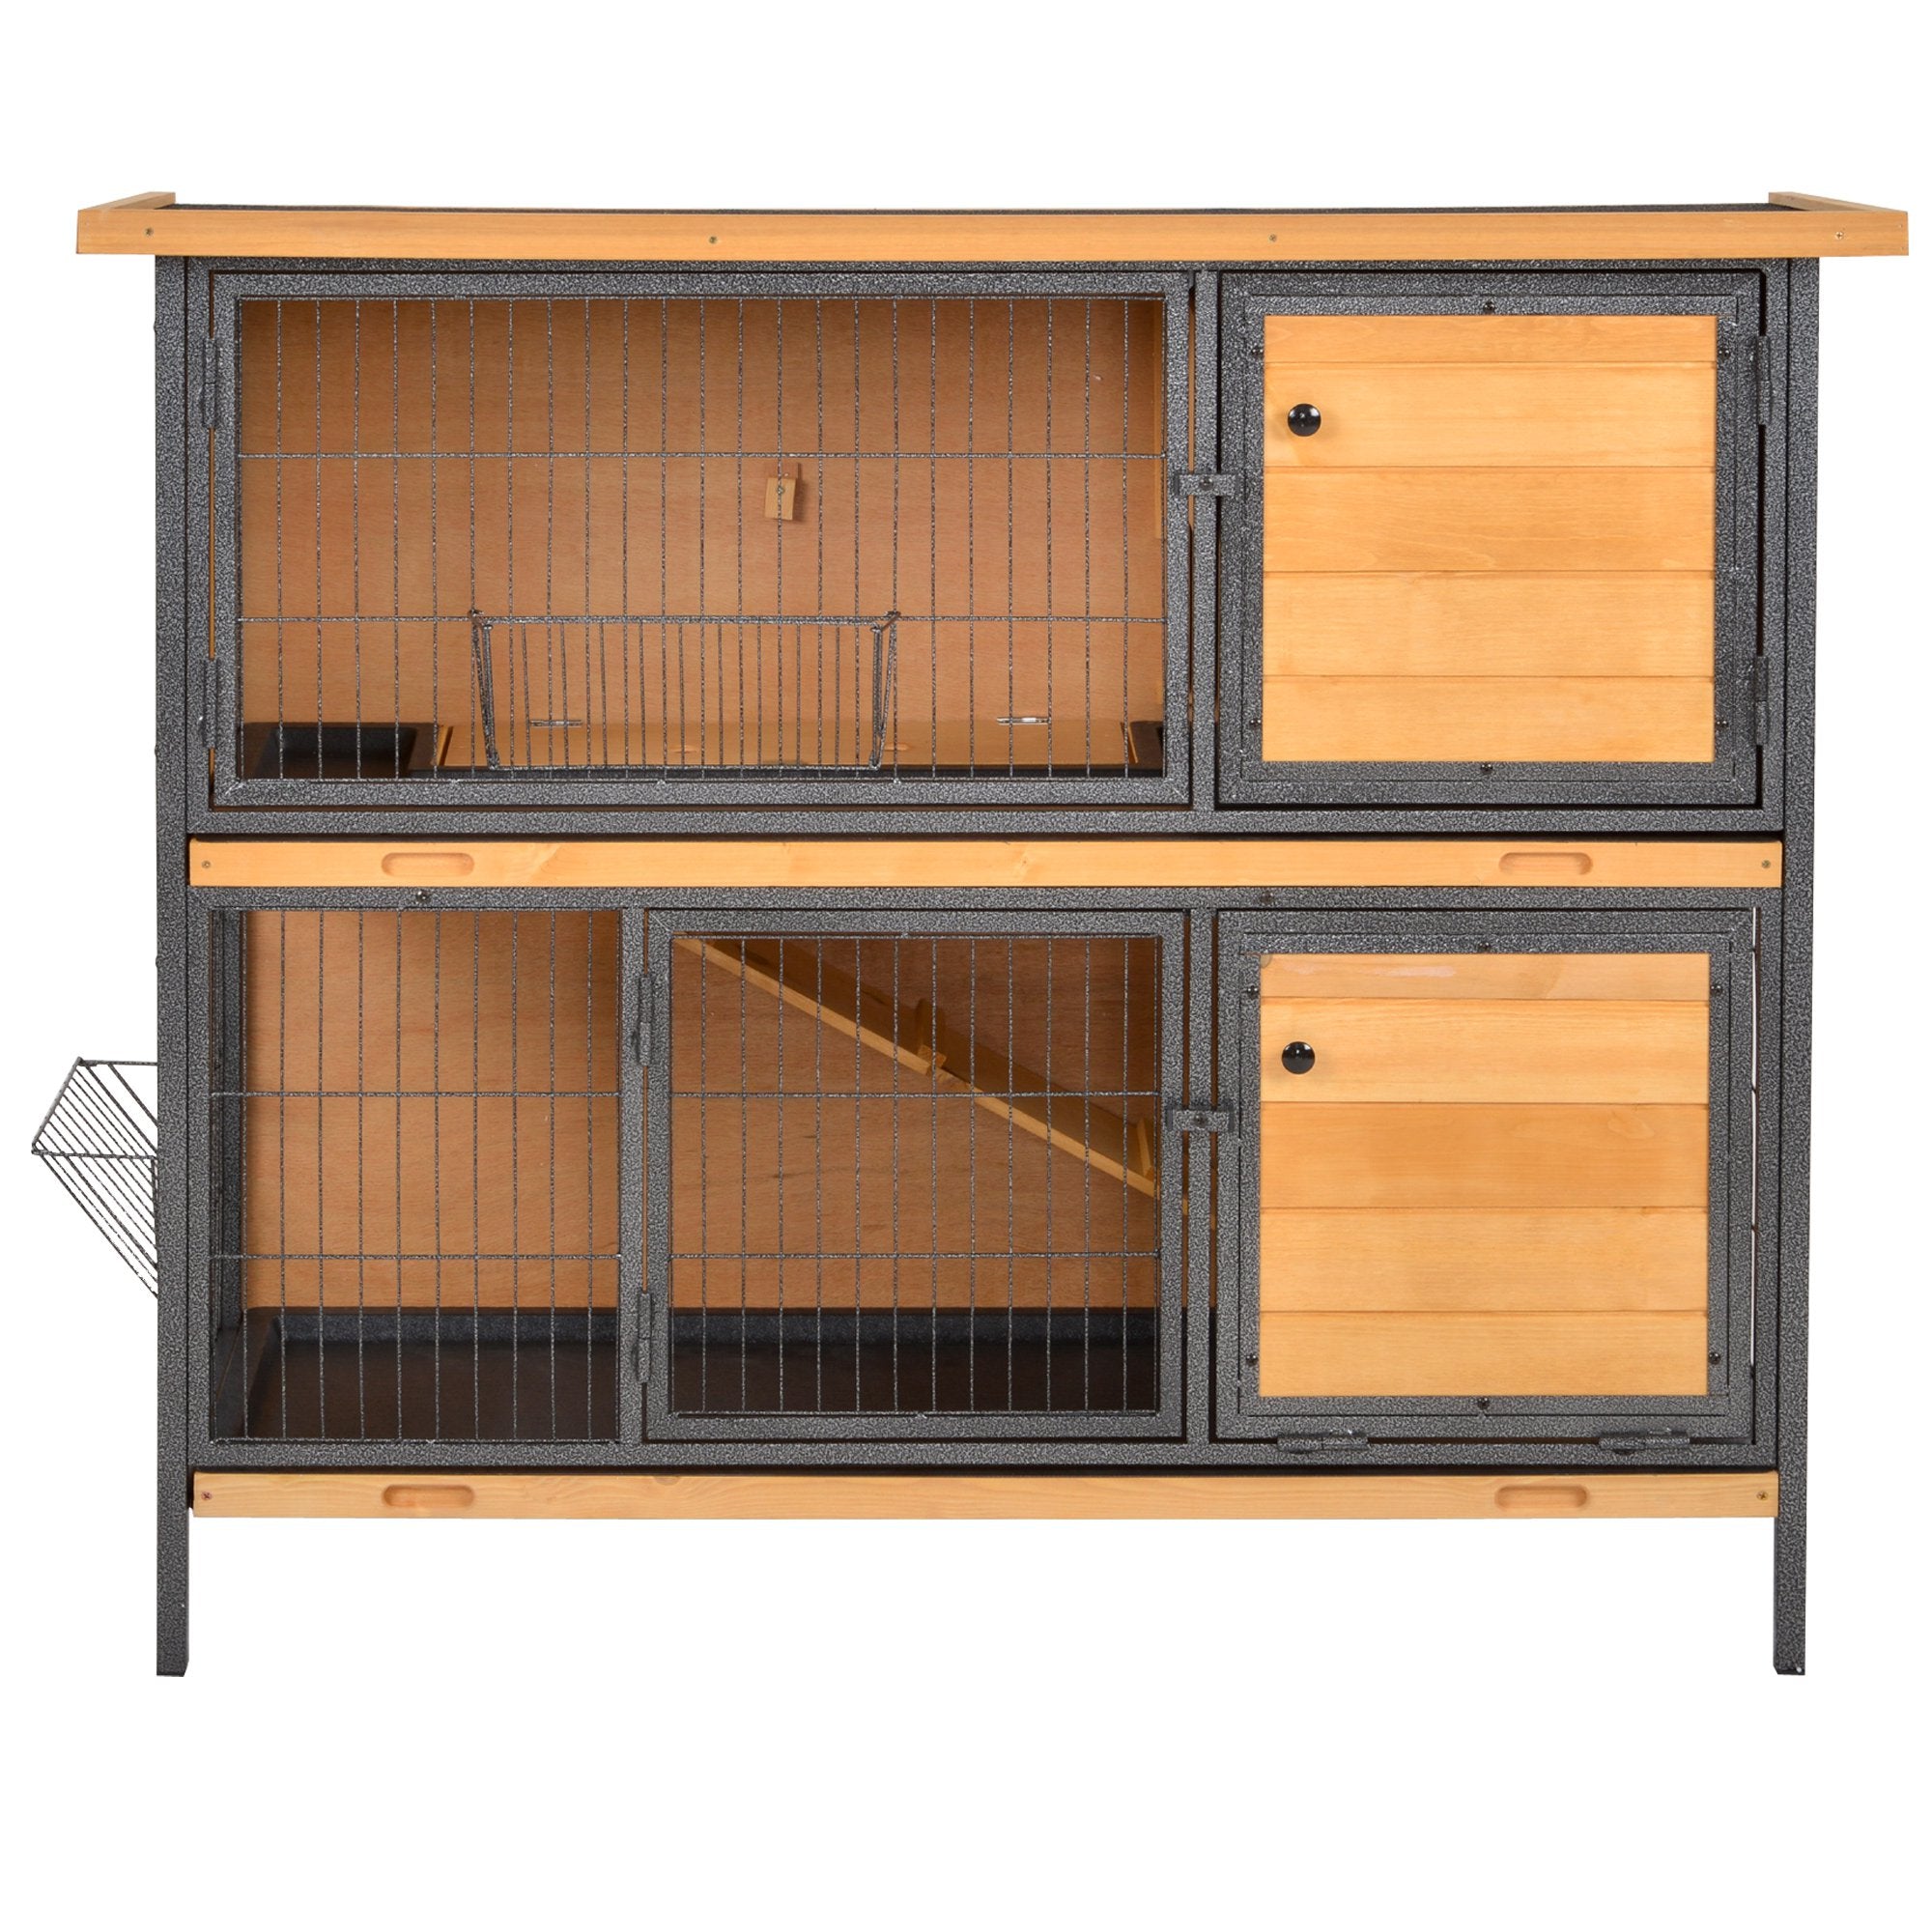 Wooden Metal Rabbit Hutch Pet House Bunny w/ Slide-Out Tray Outdoor Light Yellow,black